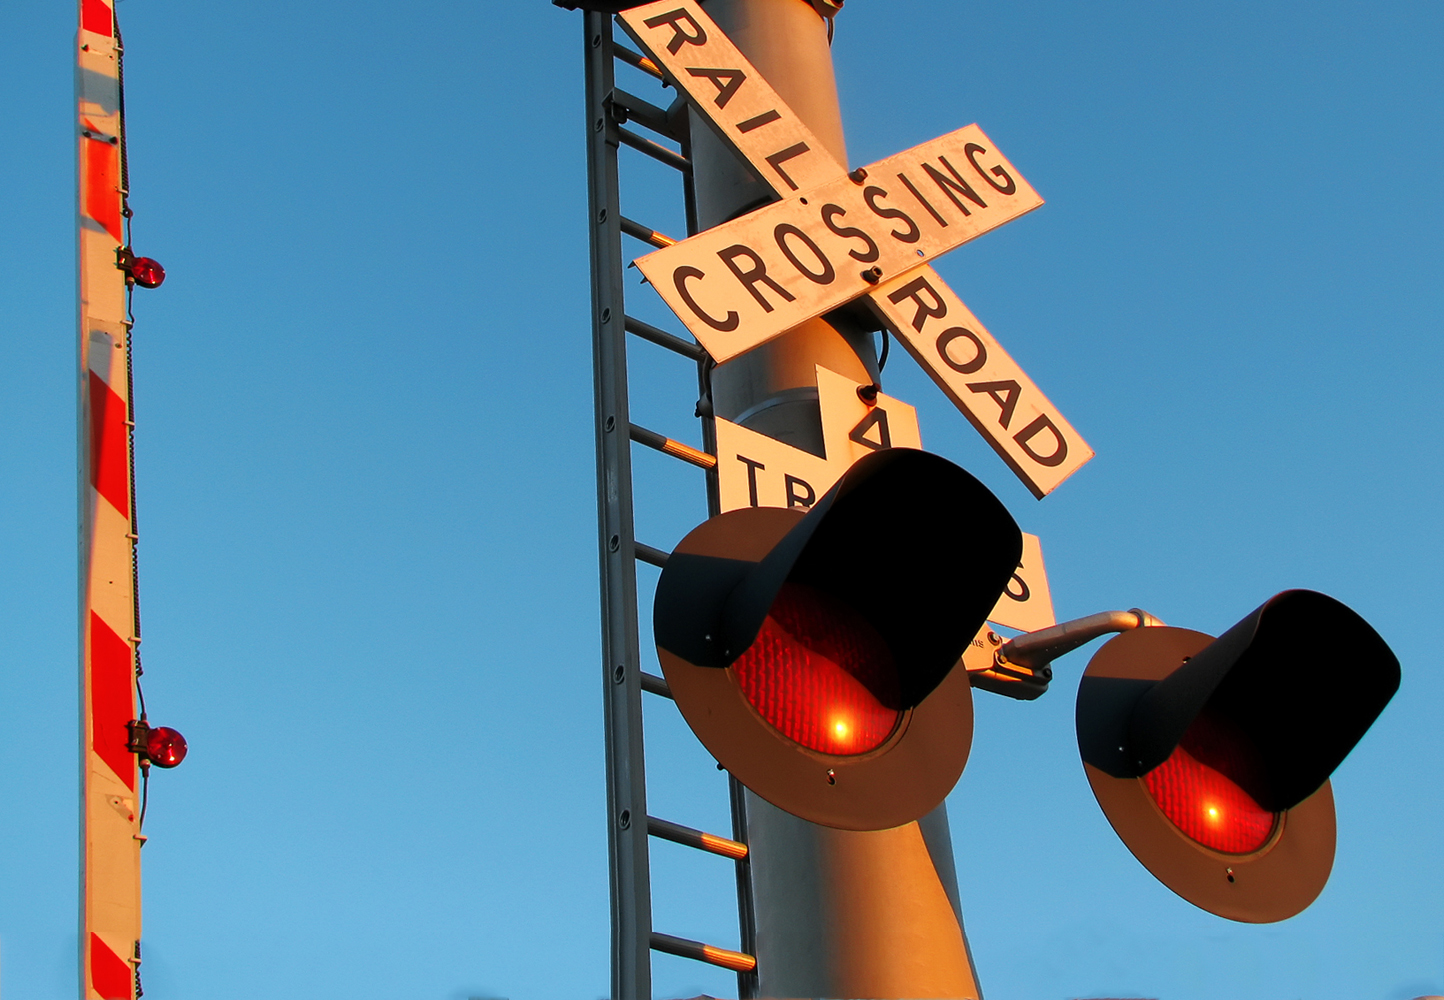 Railroad Signs And Warning Devices